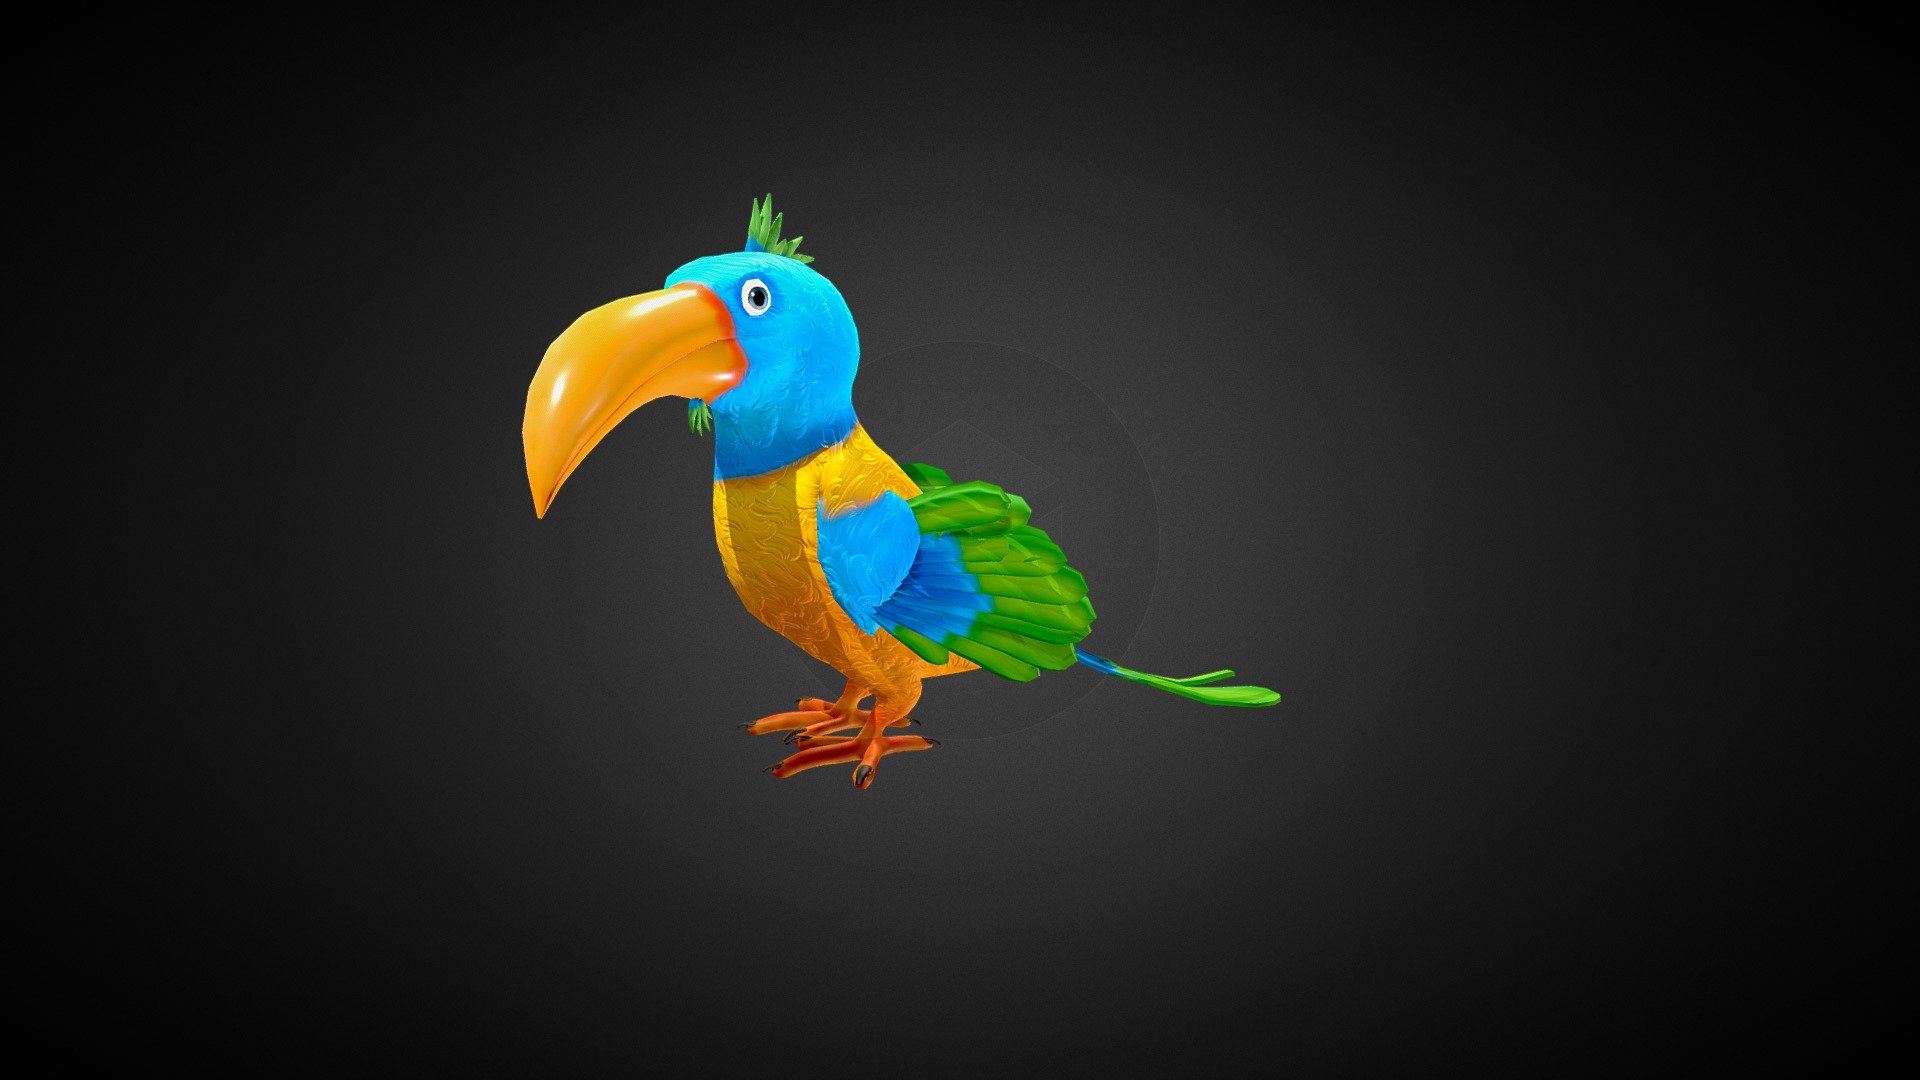 Cartoon Birds:
A low-poly Cartoon Bird with hand painted high quality texture.This Assets use AR,VR,mobile Game,pc game and any different projects.
All assets are created in a low poly art style. The material setups are simple and you are able to customize them easily.Use unity standard material.
Rig: Fully supports mecanim humanoid animation system.I hope you like this game ready asset. Humanoid mecanim system rig.
Textures Size:
2048x2048

Number of textures: 7( Basecolor map ,Normal Map and MetallicSmoothness_Map)
Texture dimensions: 2k
Polygon count of [Cartoon Birds]
Vertis: 6885
Face: 6228
Tris: 13556
Number of meshes: 1
Rigging: Yes
Animation count: : 11
Fly,CircleFily,Attack,Walk,Idle_01,Idle_02,Die,Land,Rise,Preen,Eat
Animation type list: RootMotion &amp; In Place
UV mapping: Yes, Non-Overlapping
All Gaming Engine Supported,Like-Unity.Unriel Engine Ect 3d model